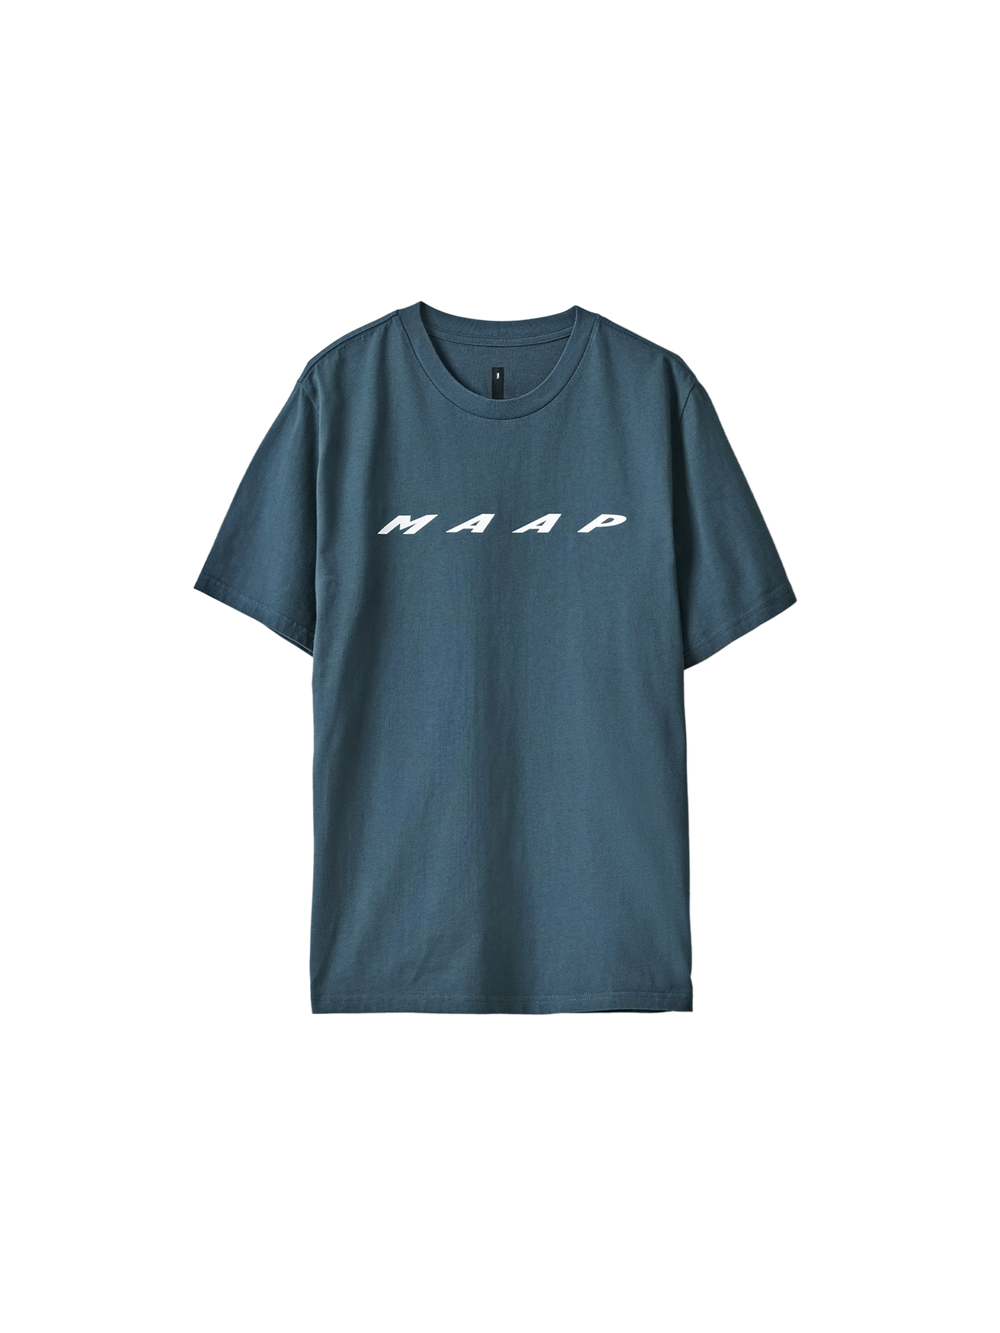 Product Image for Evade Tee